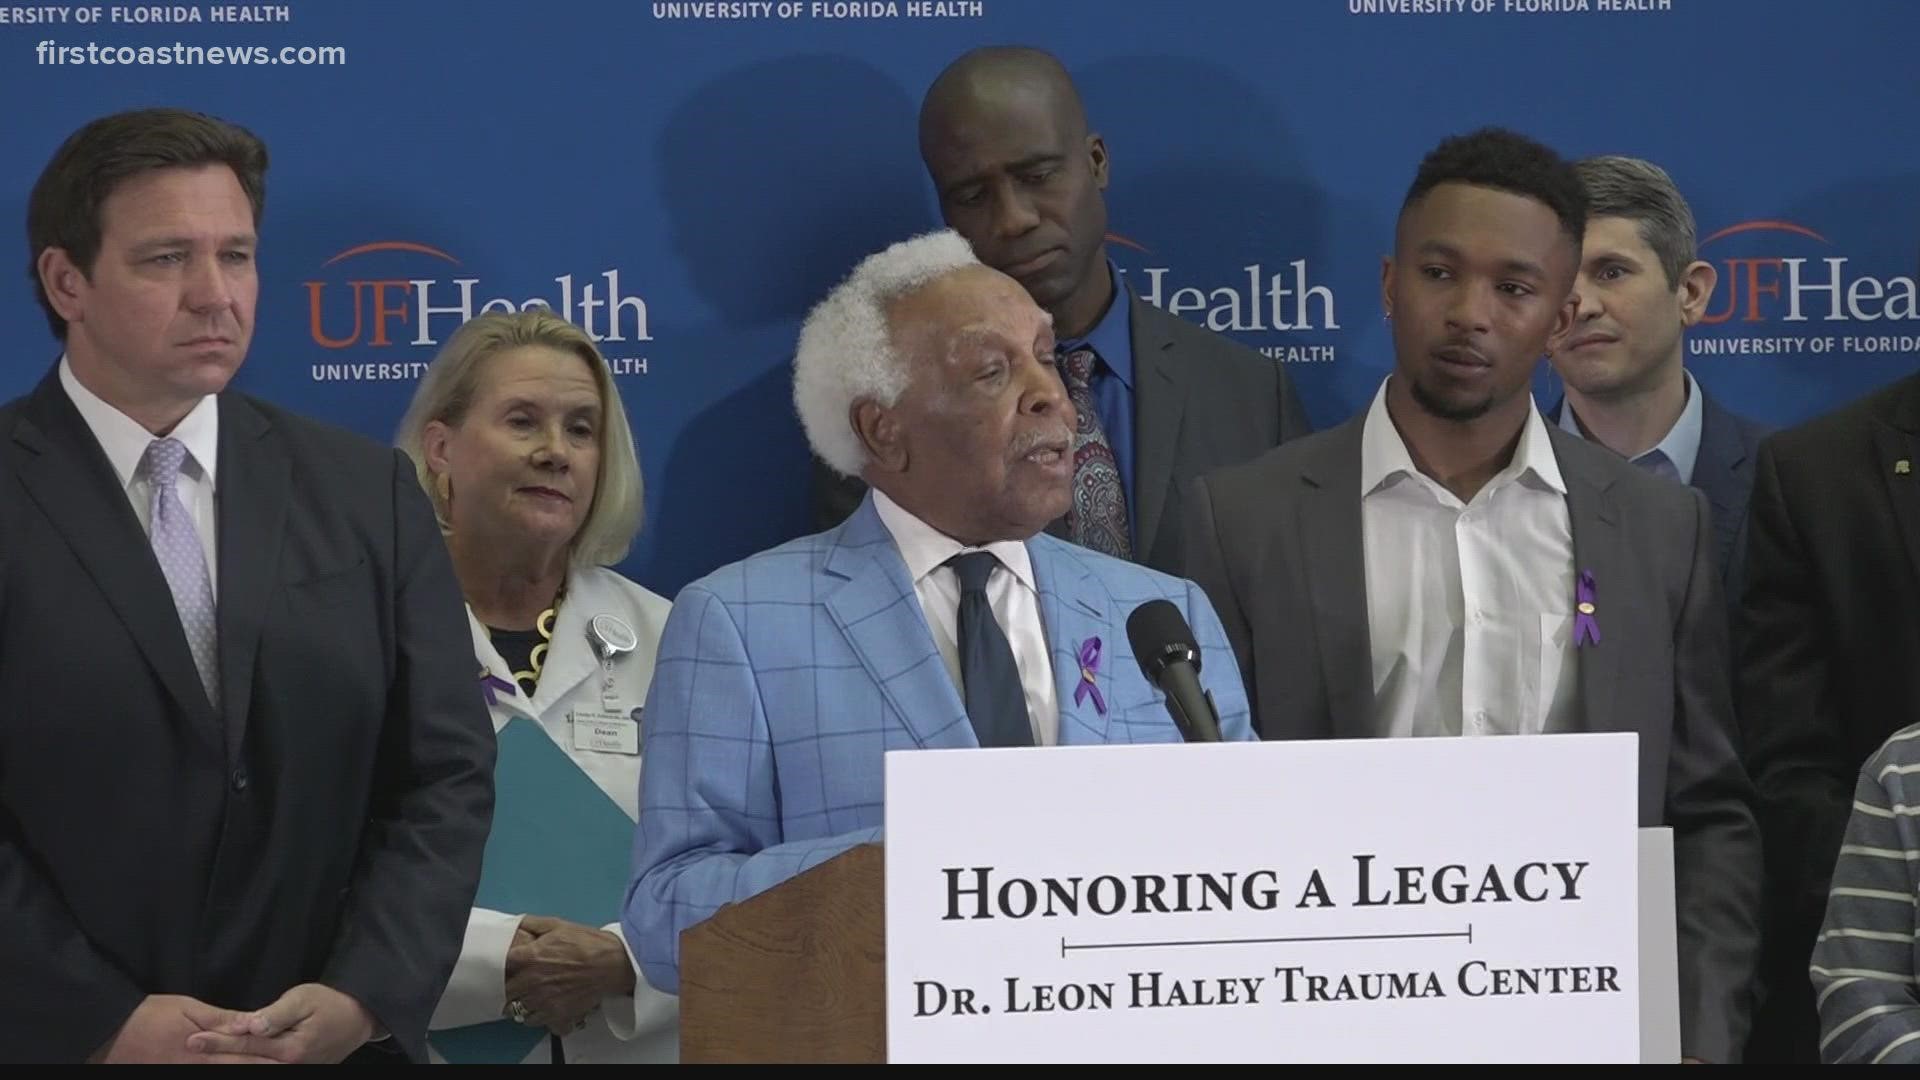 Dr. Leon Haley Jr. was killed in a watercraft accident in July 2022.